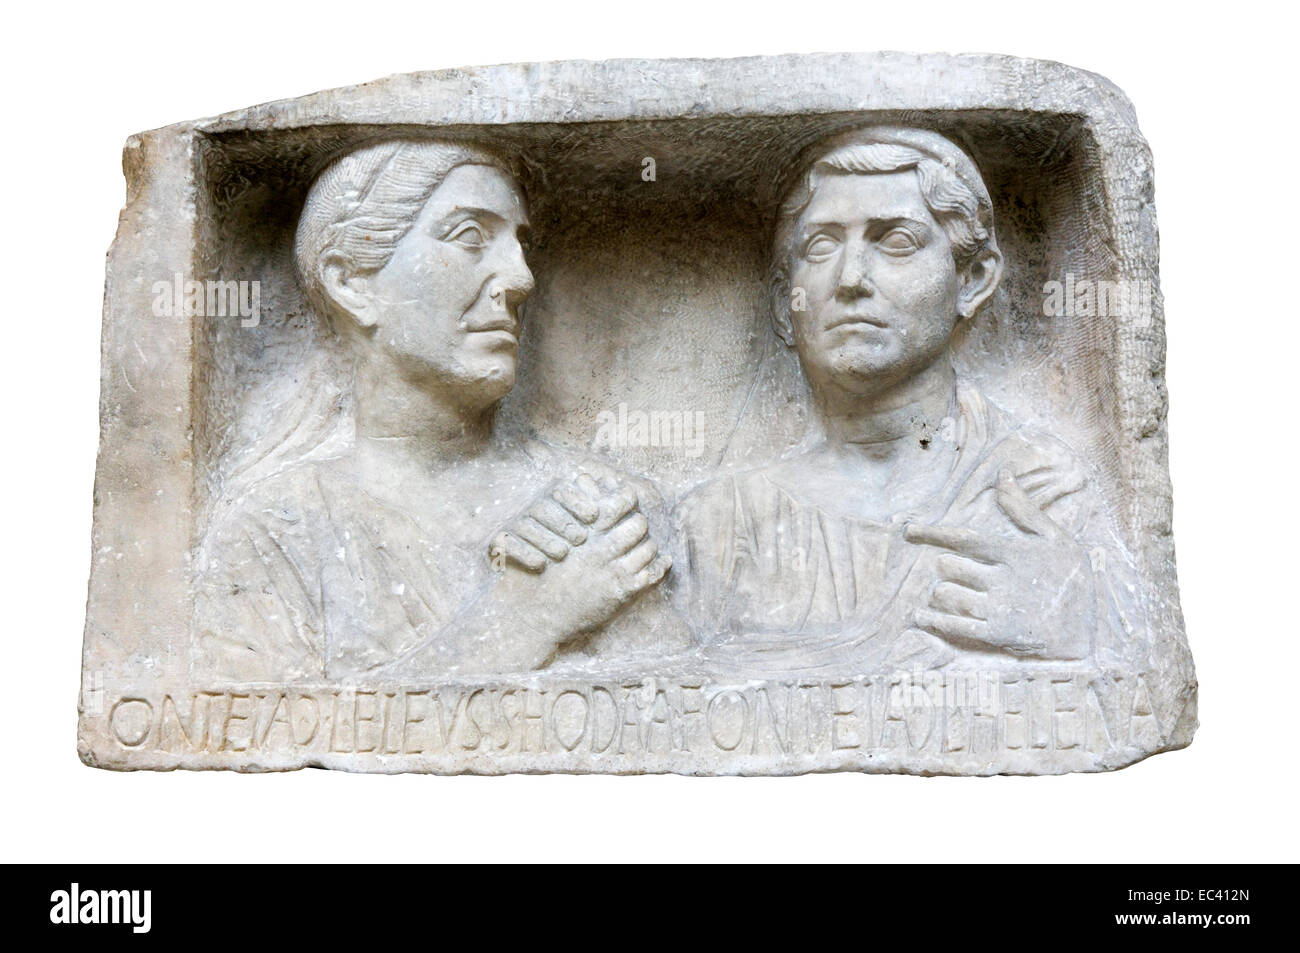 A Roman limestone relief of two women from about 25 BC - AD 10. Stock Photo